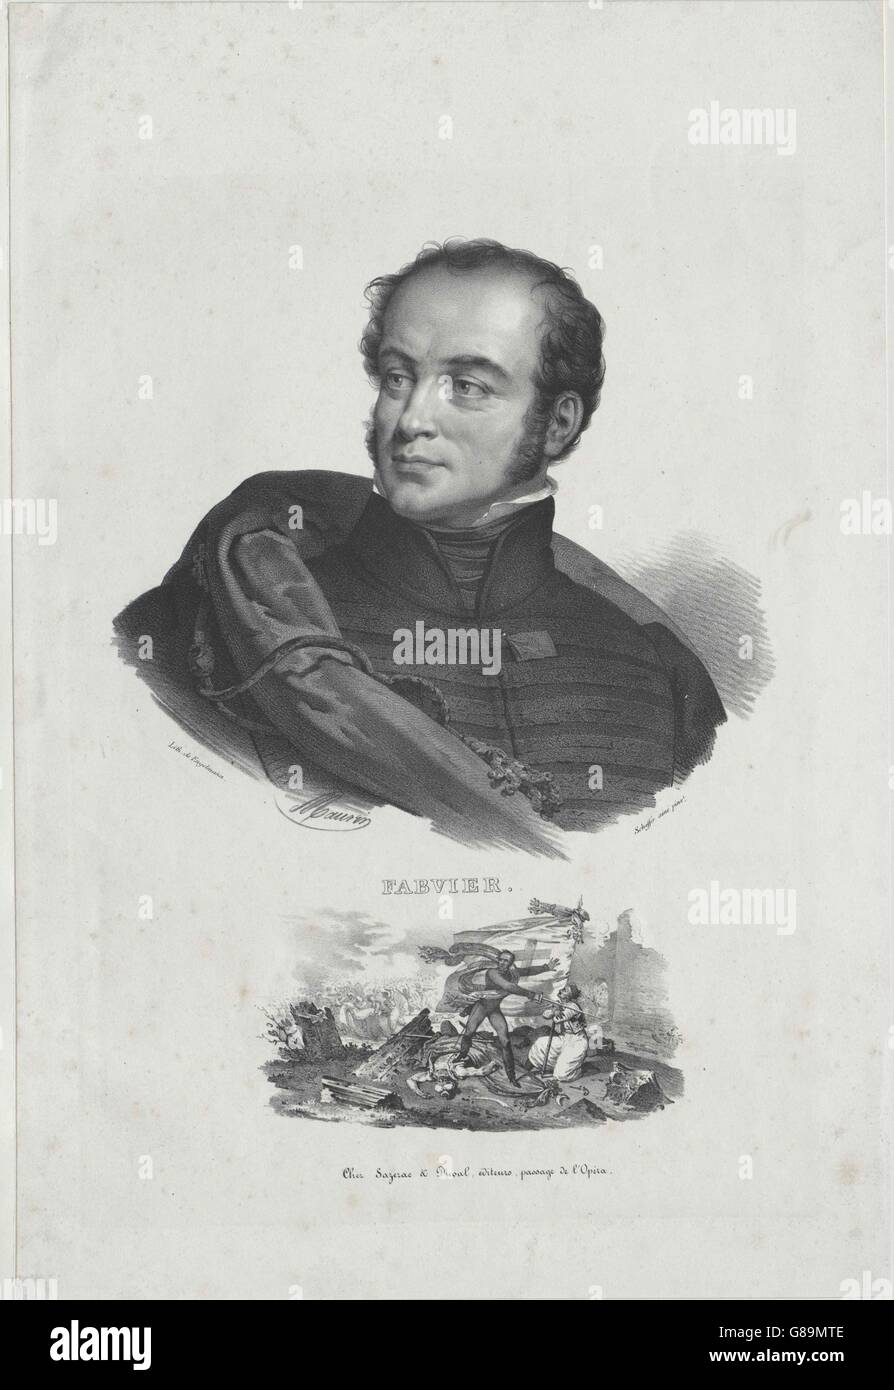 Fabvier, Charles Nicolas Baron Banque D'Images